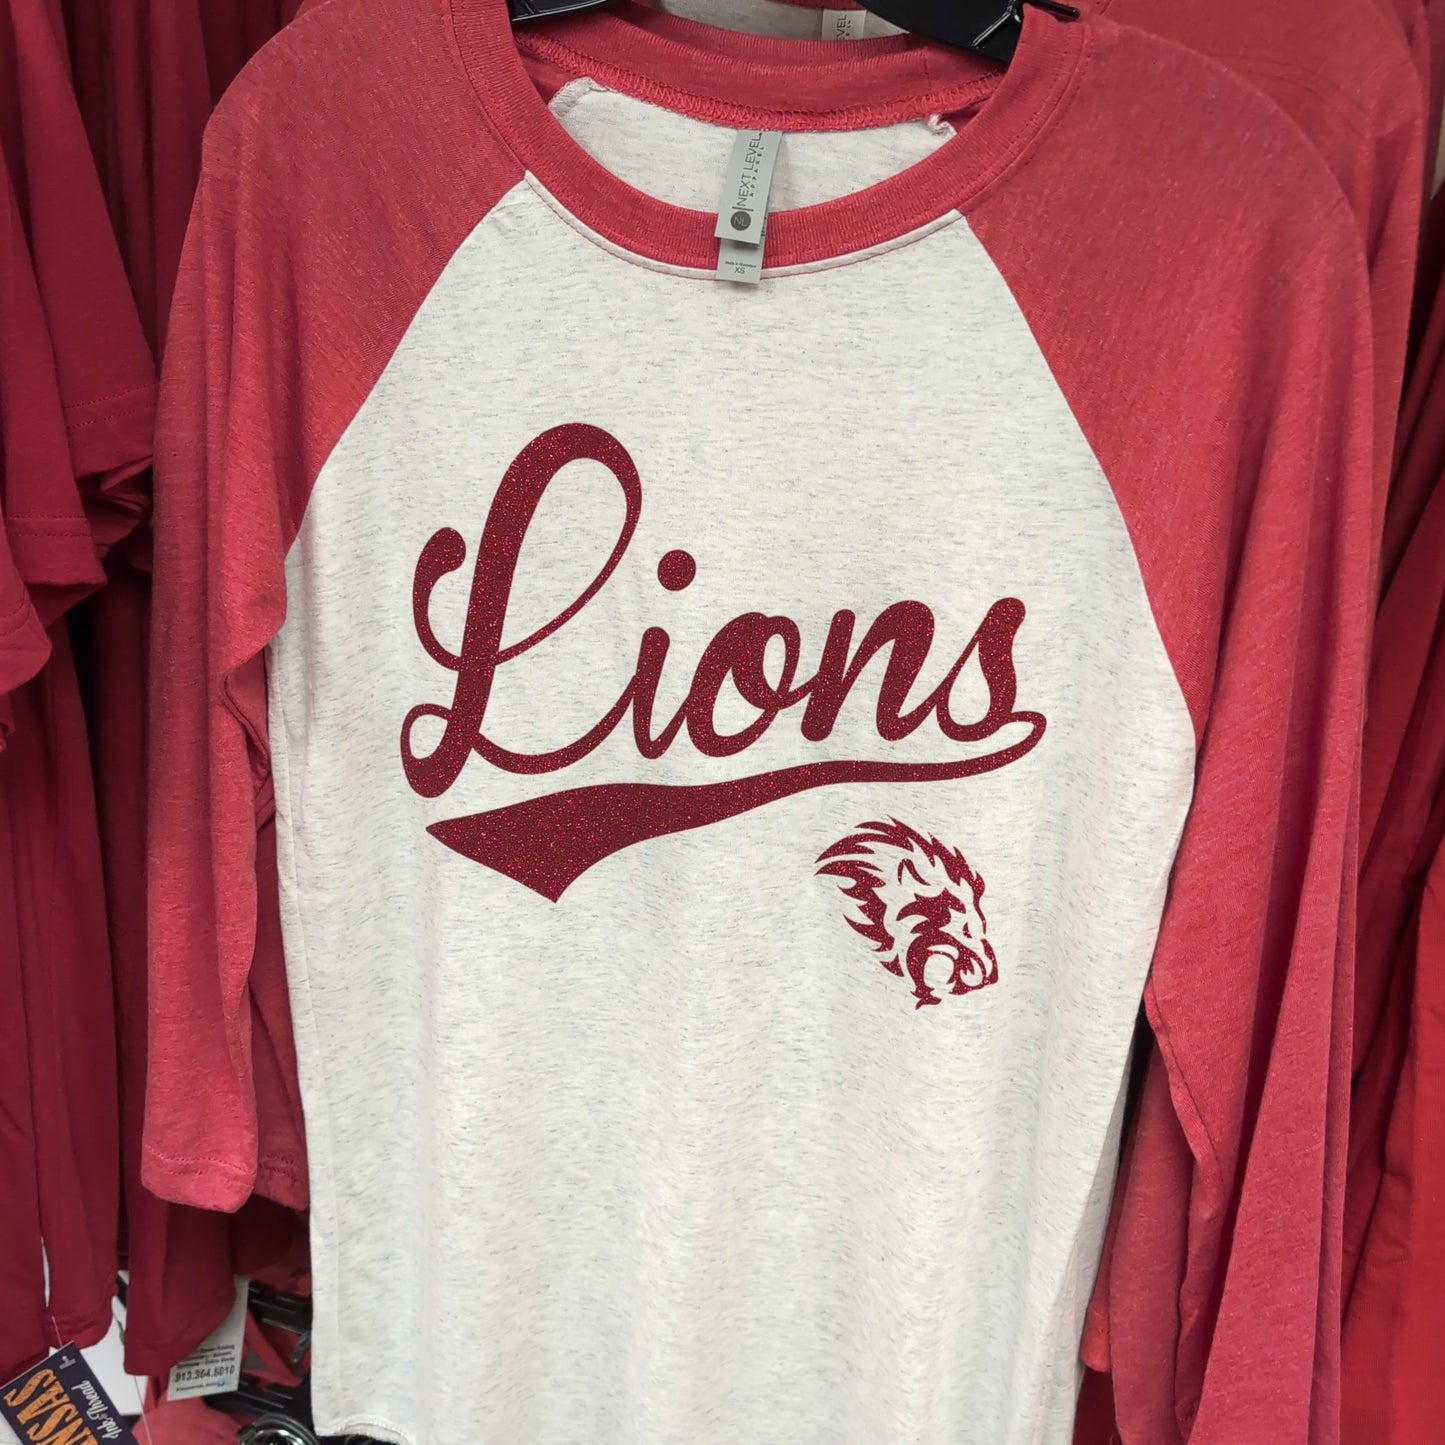 3/4 Lions Red Sleeve Gray Triblend Shirt